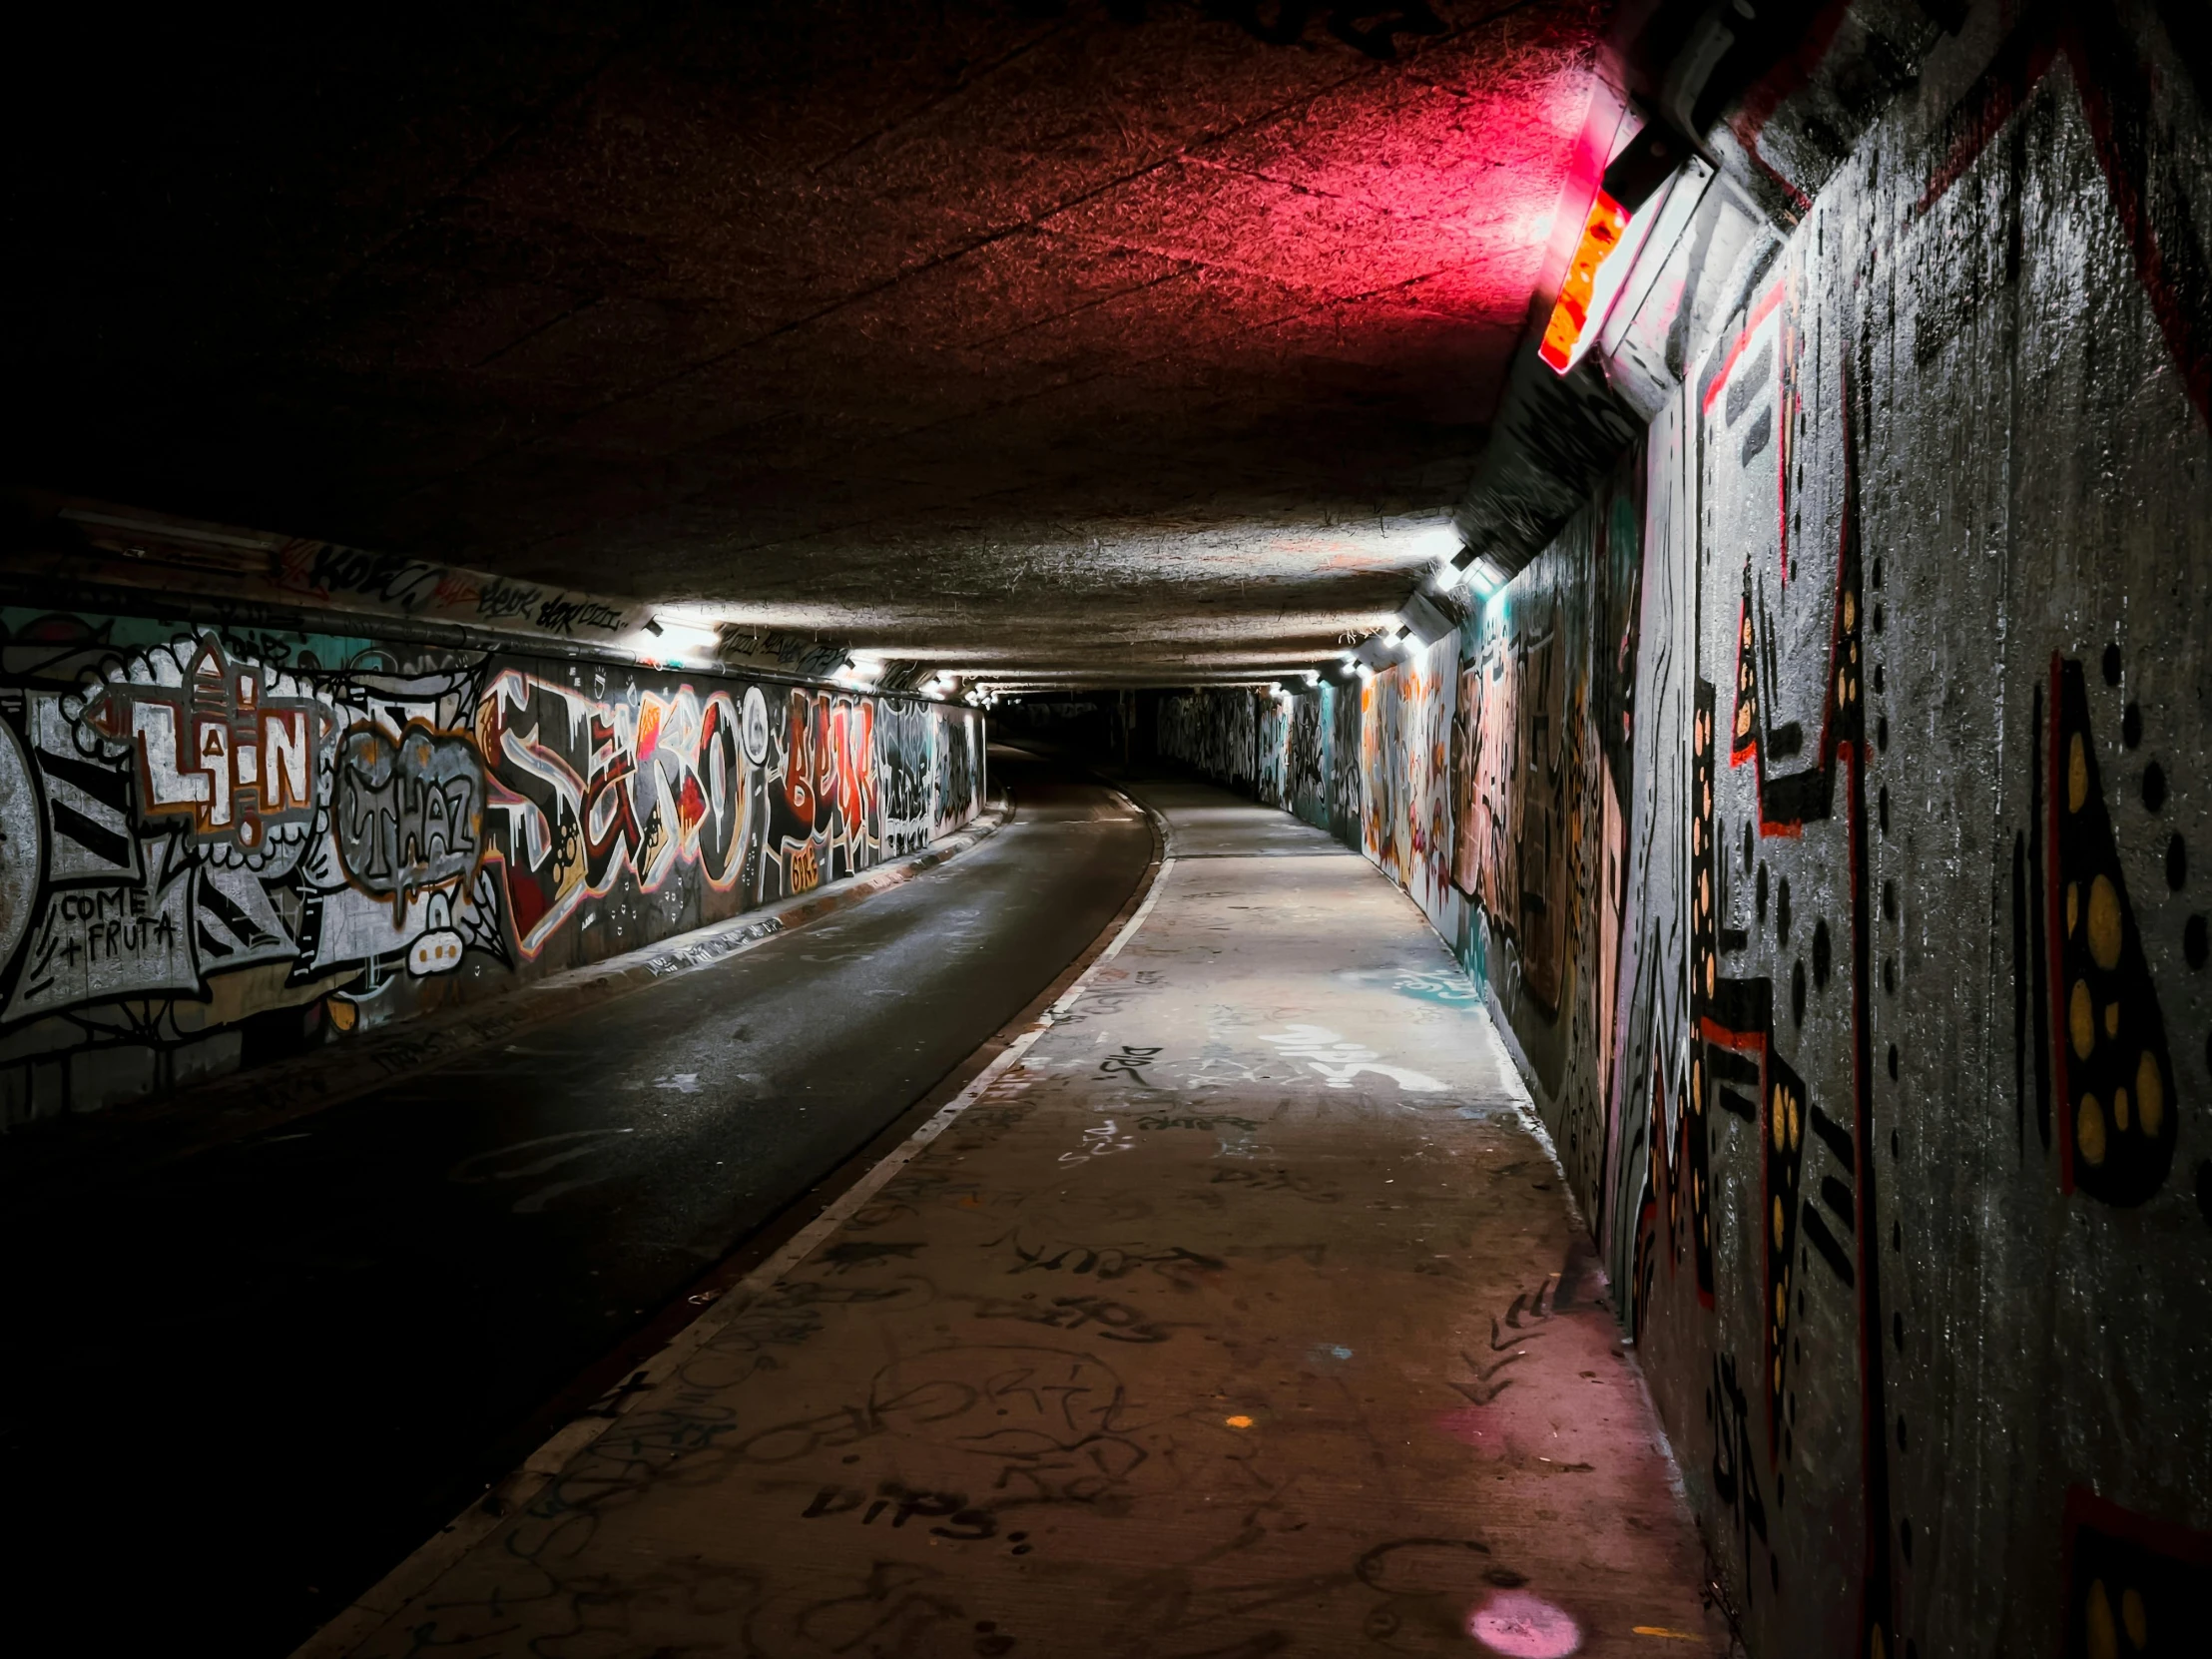 a dark tunnel with graffiti on the walls, colourful lighting, grey, paths, low-light photograph